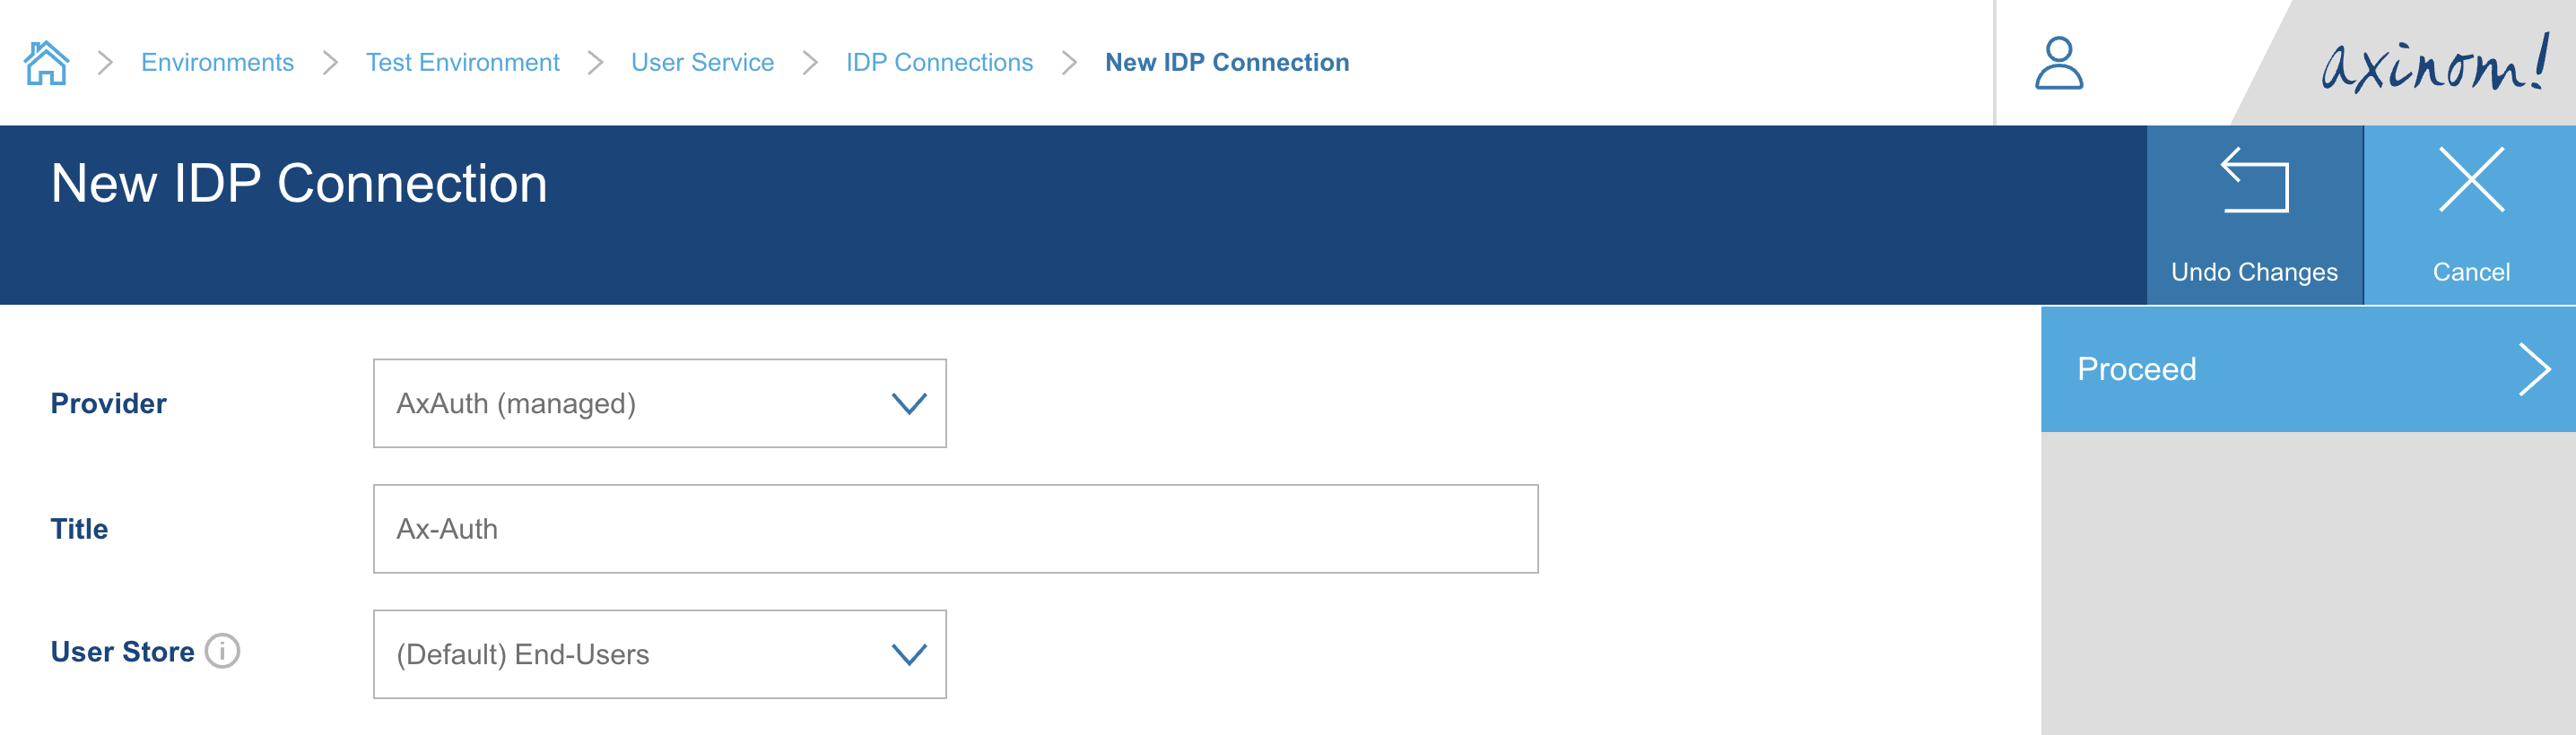 idp connection new axauth